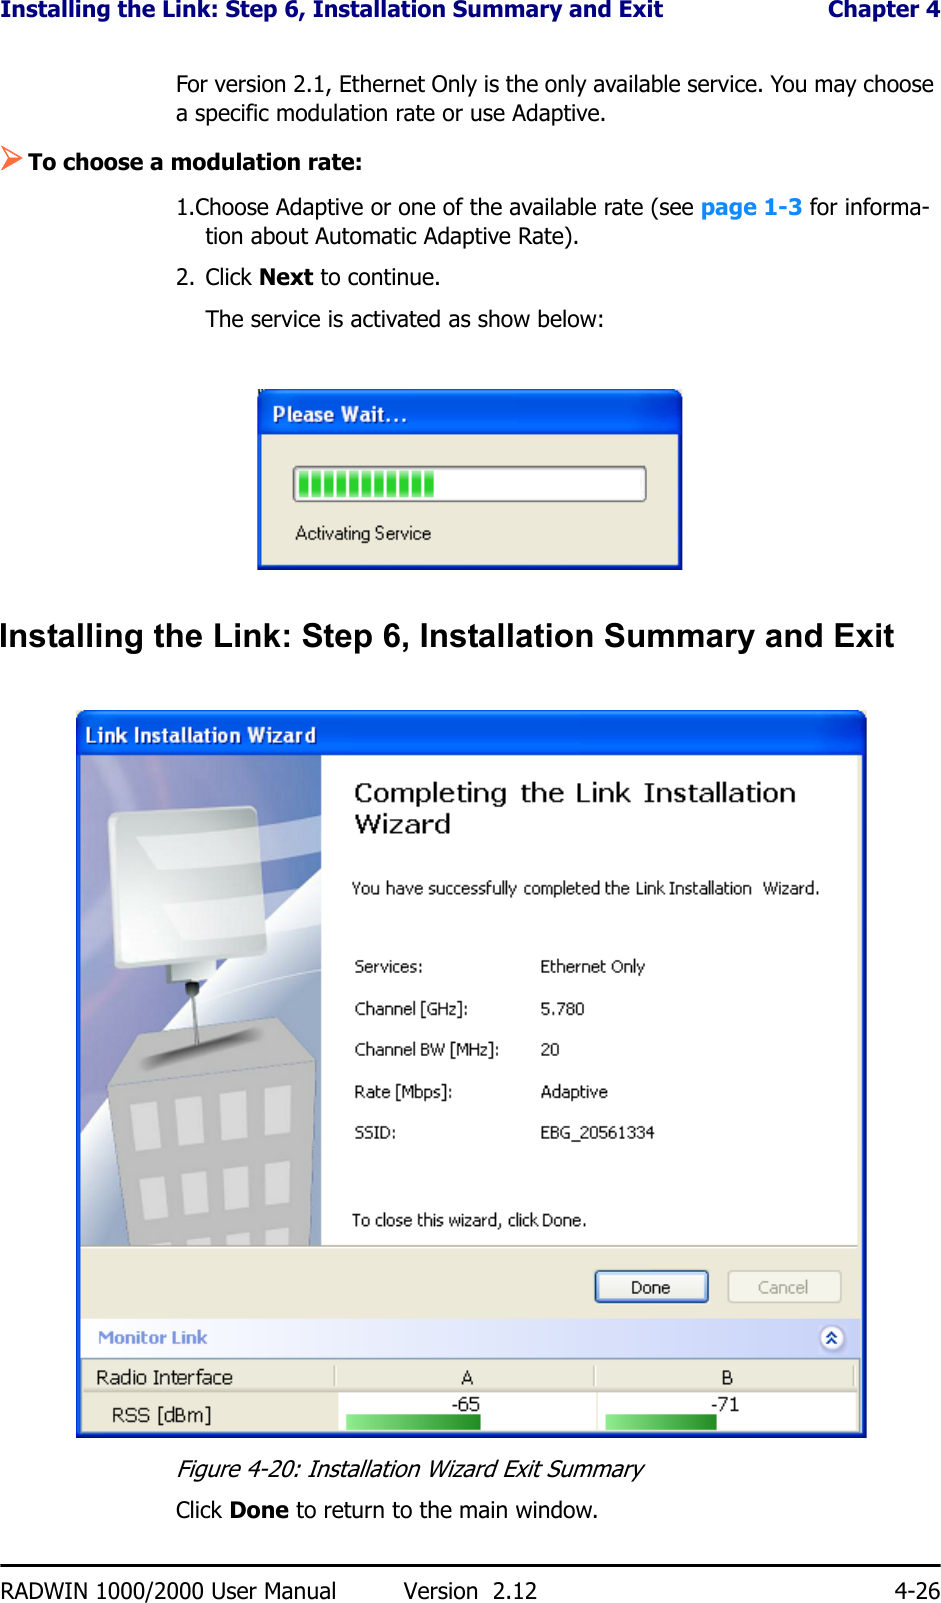 Installing the Link: Step 6, Installation Summary and Exit  Chapter 4RADWIN 1000/2000 User Manual Version  2.12 4-26For version 2.1, Ethernet Only is the only available service. You may choose a specific modulation rate or use Adaptive.¾To choose a modulation rate:1.Choose Adaptive or one of the available rate (see page 1-3 for informa-tion about Automatic Adaptive Rate).2. Click Next to continue.The service is activated as show below:Installing the Link: Step 6, Installation Summary and ExitFigure 4-20: Installation Wizard Exit Summary Click Done to return to the main window.